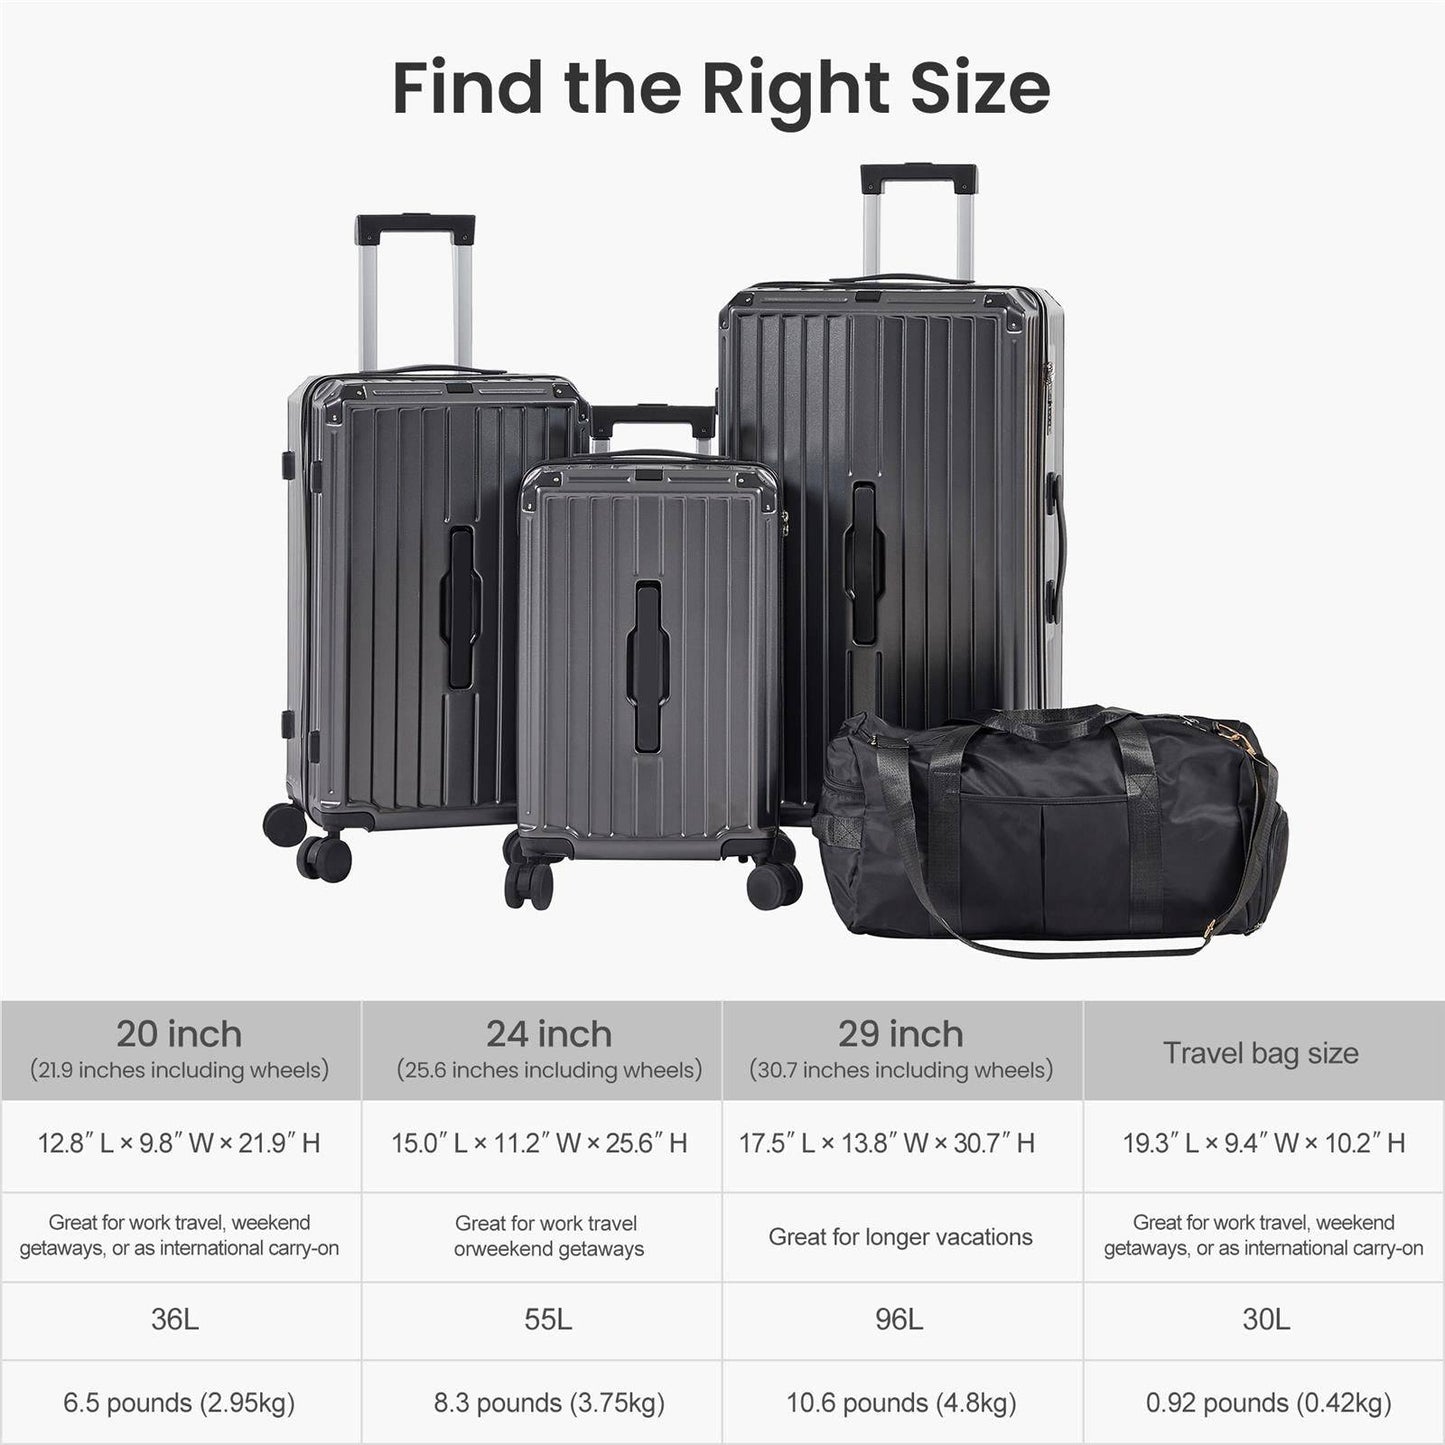 Luggage Set 4 pcs (20"/24"/29"/Travel Bag), PC+ABS Durable Lightweight Luggage with Collapsible Cup Holder, 360° Silent Spinner Wheels Gray